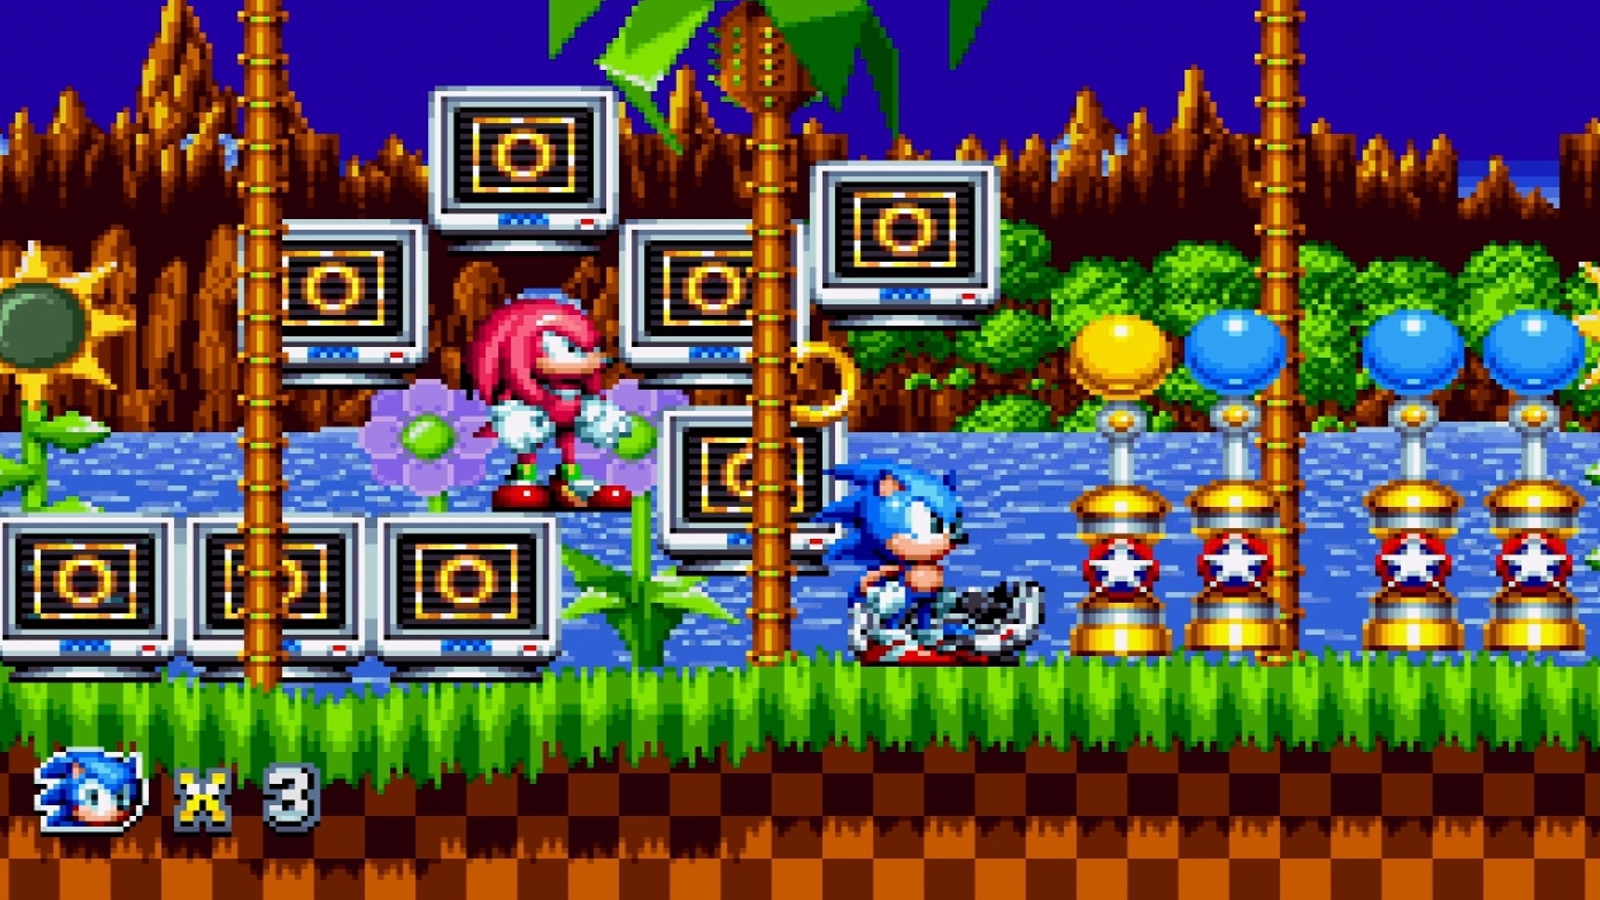 Sonic Mania - Online Game Code, Video Game Download 